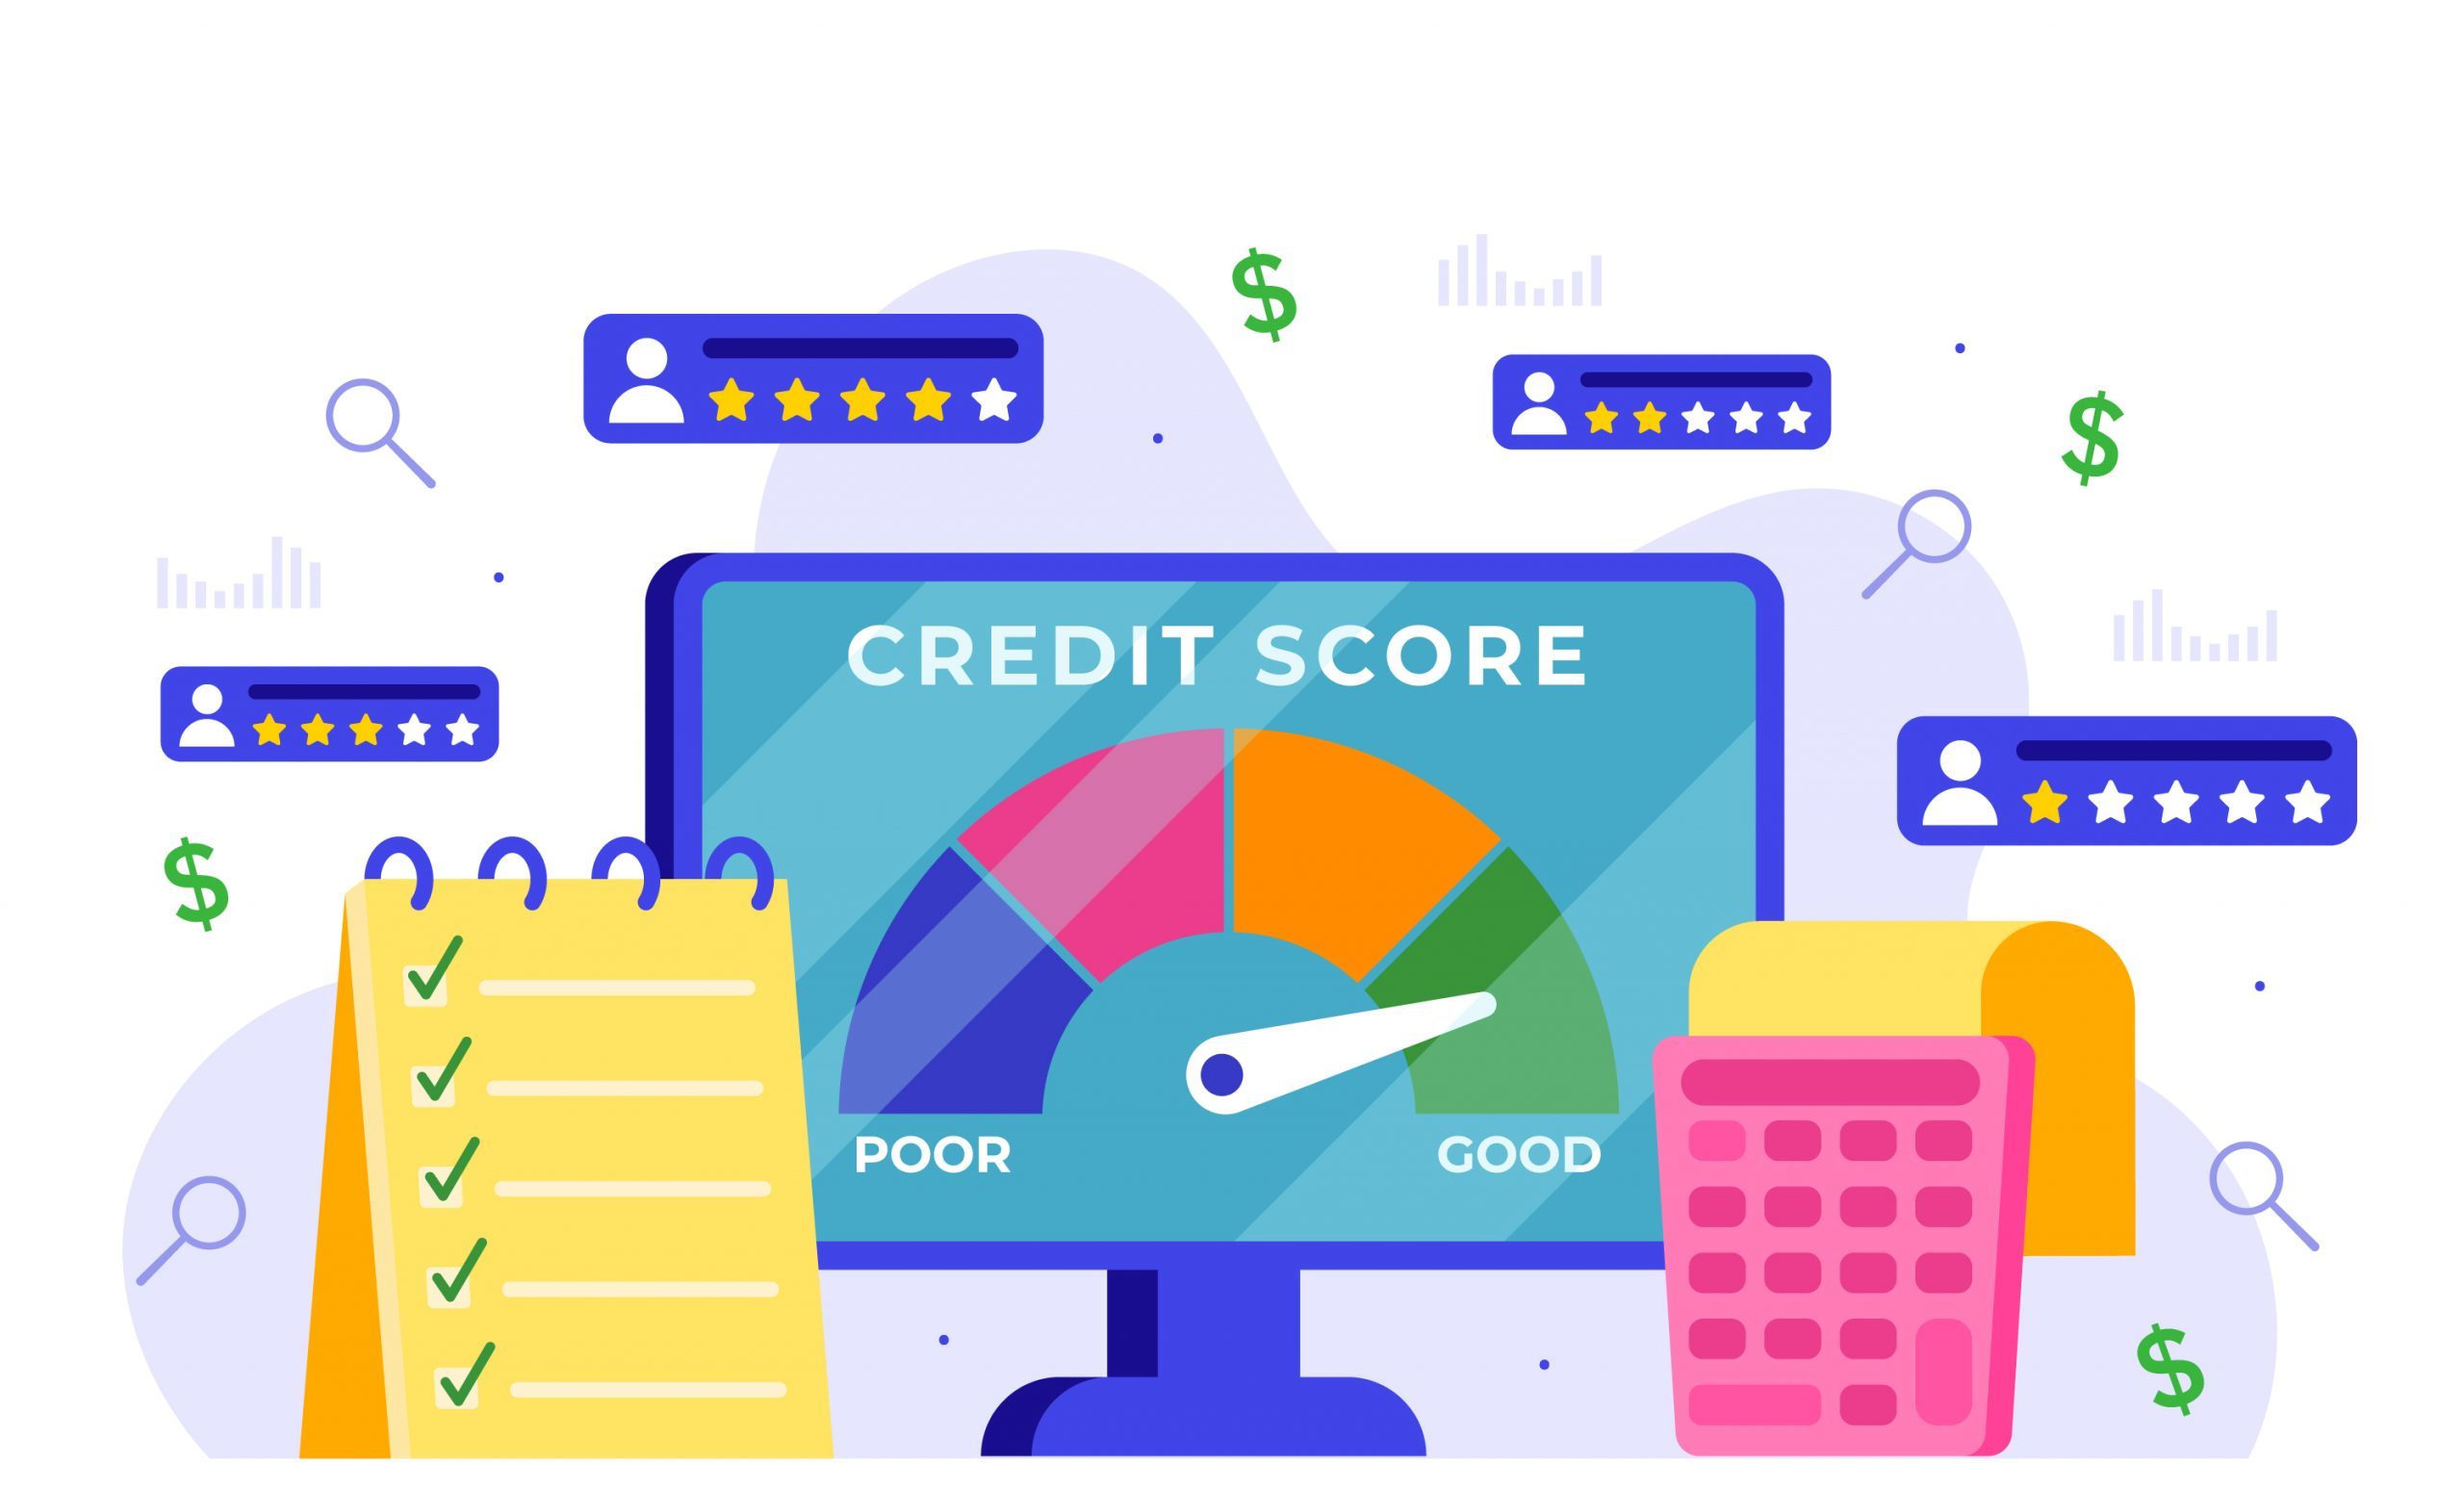 4 Tips to Improve Your Credit Score